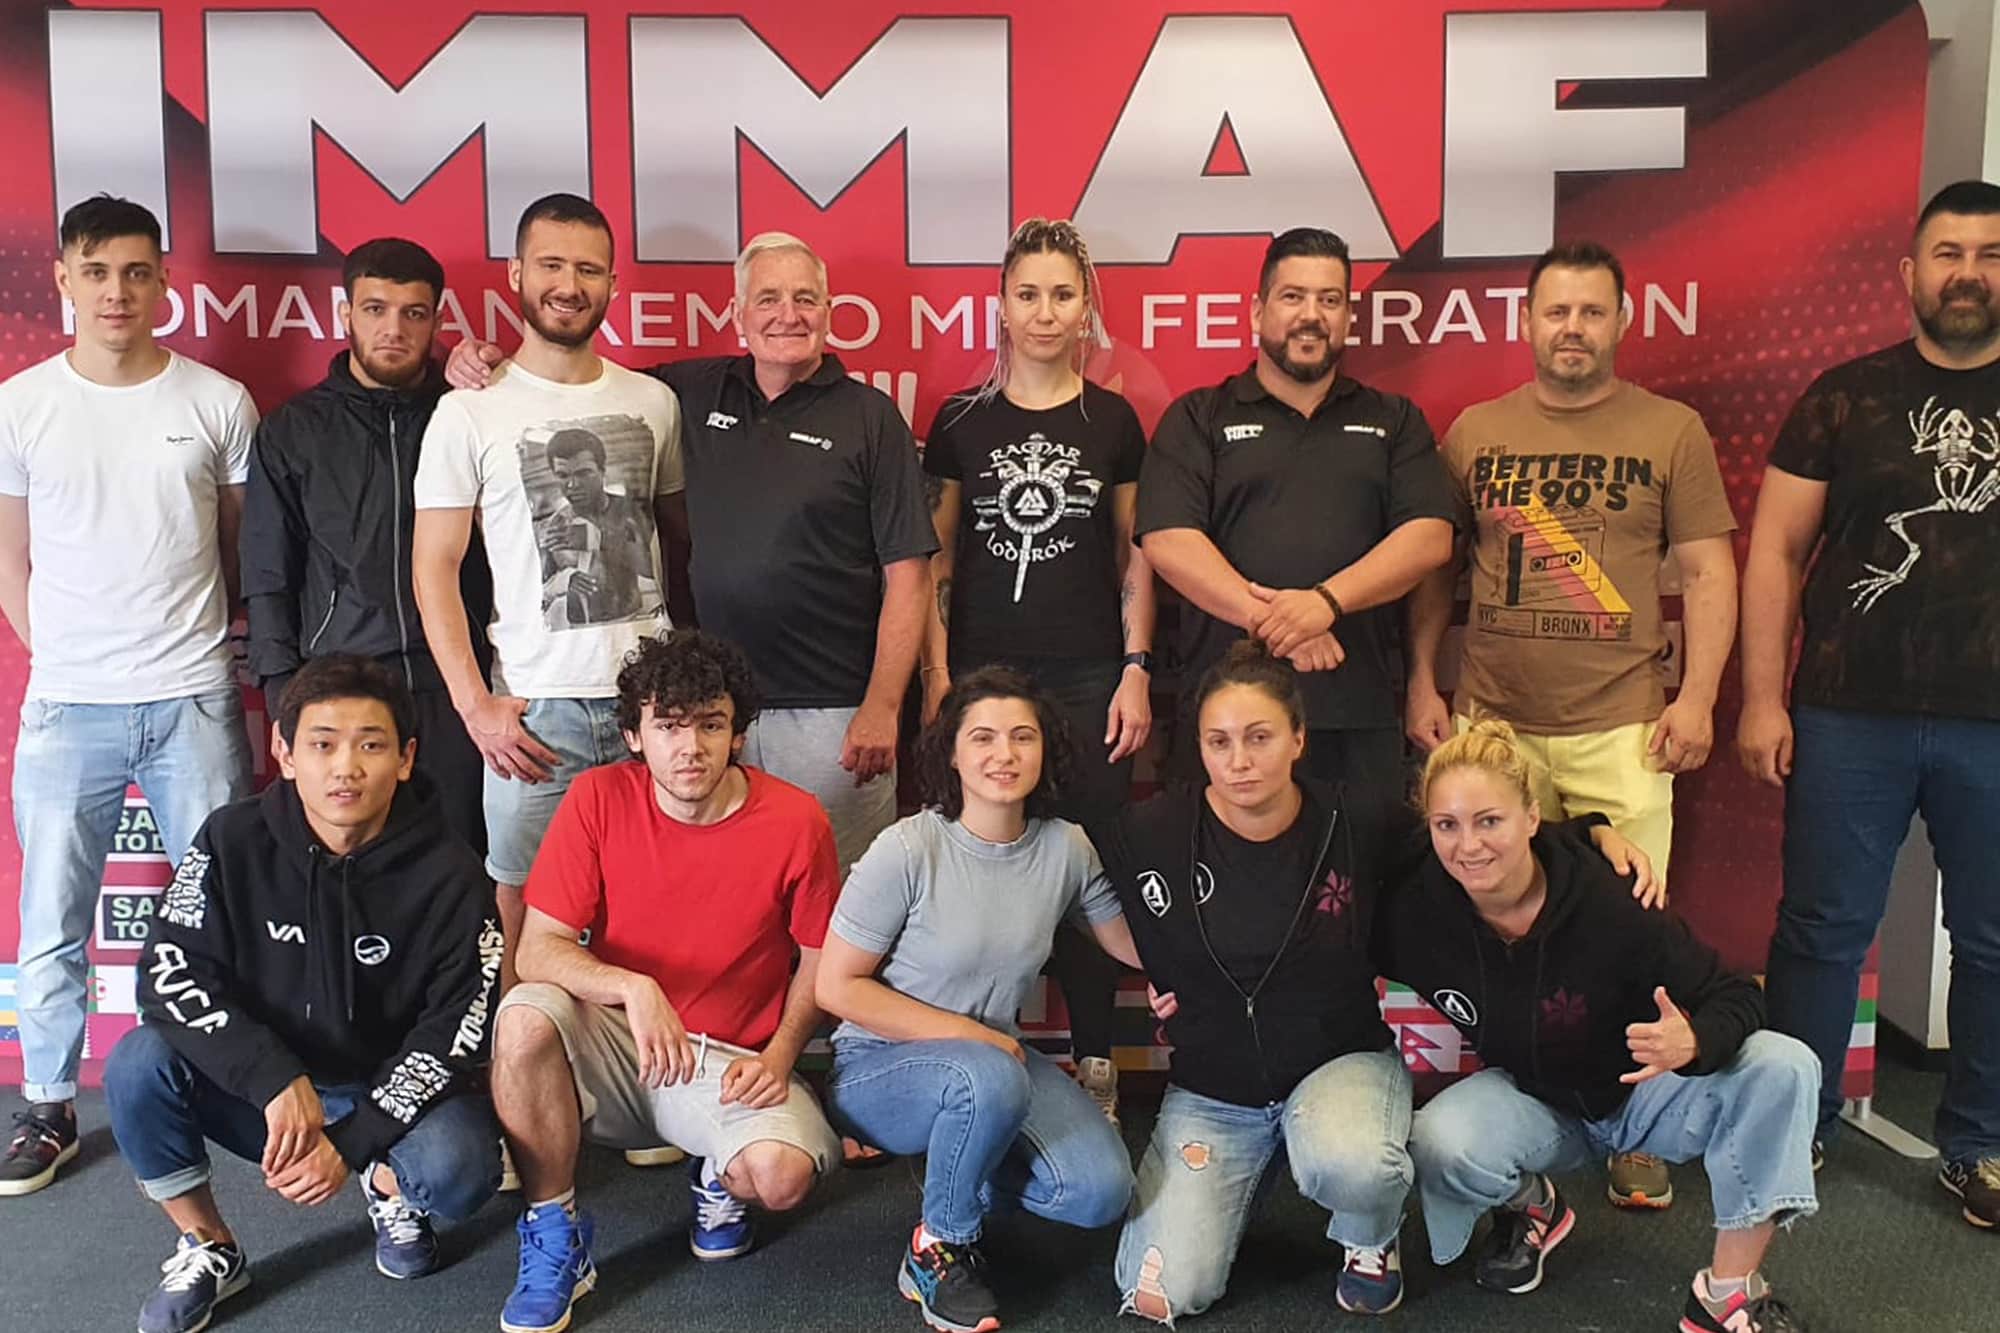 Romanian Kempo Mixed Martial Arts Federation Hold Nation’s First-Ever Cut Team Course